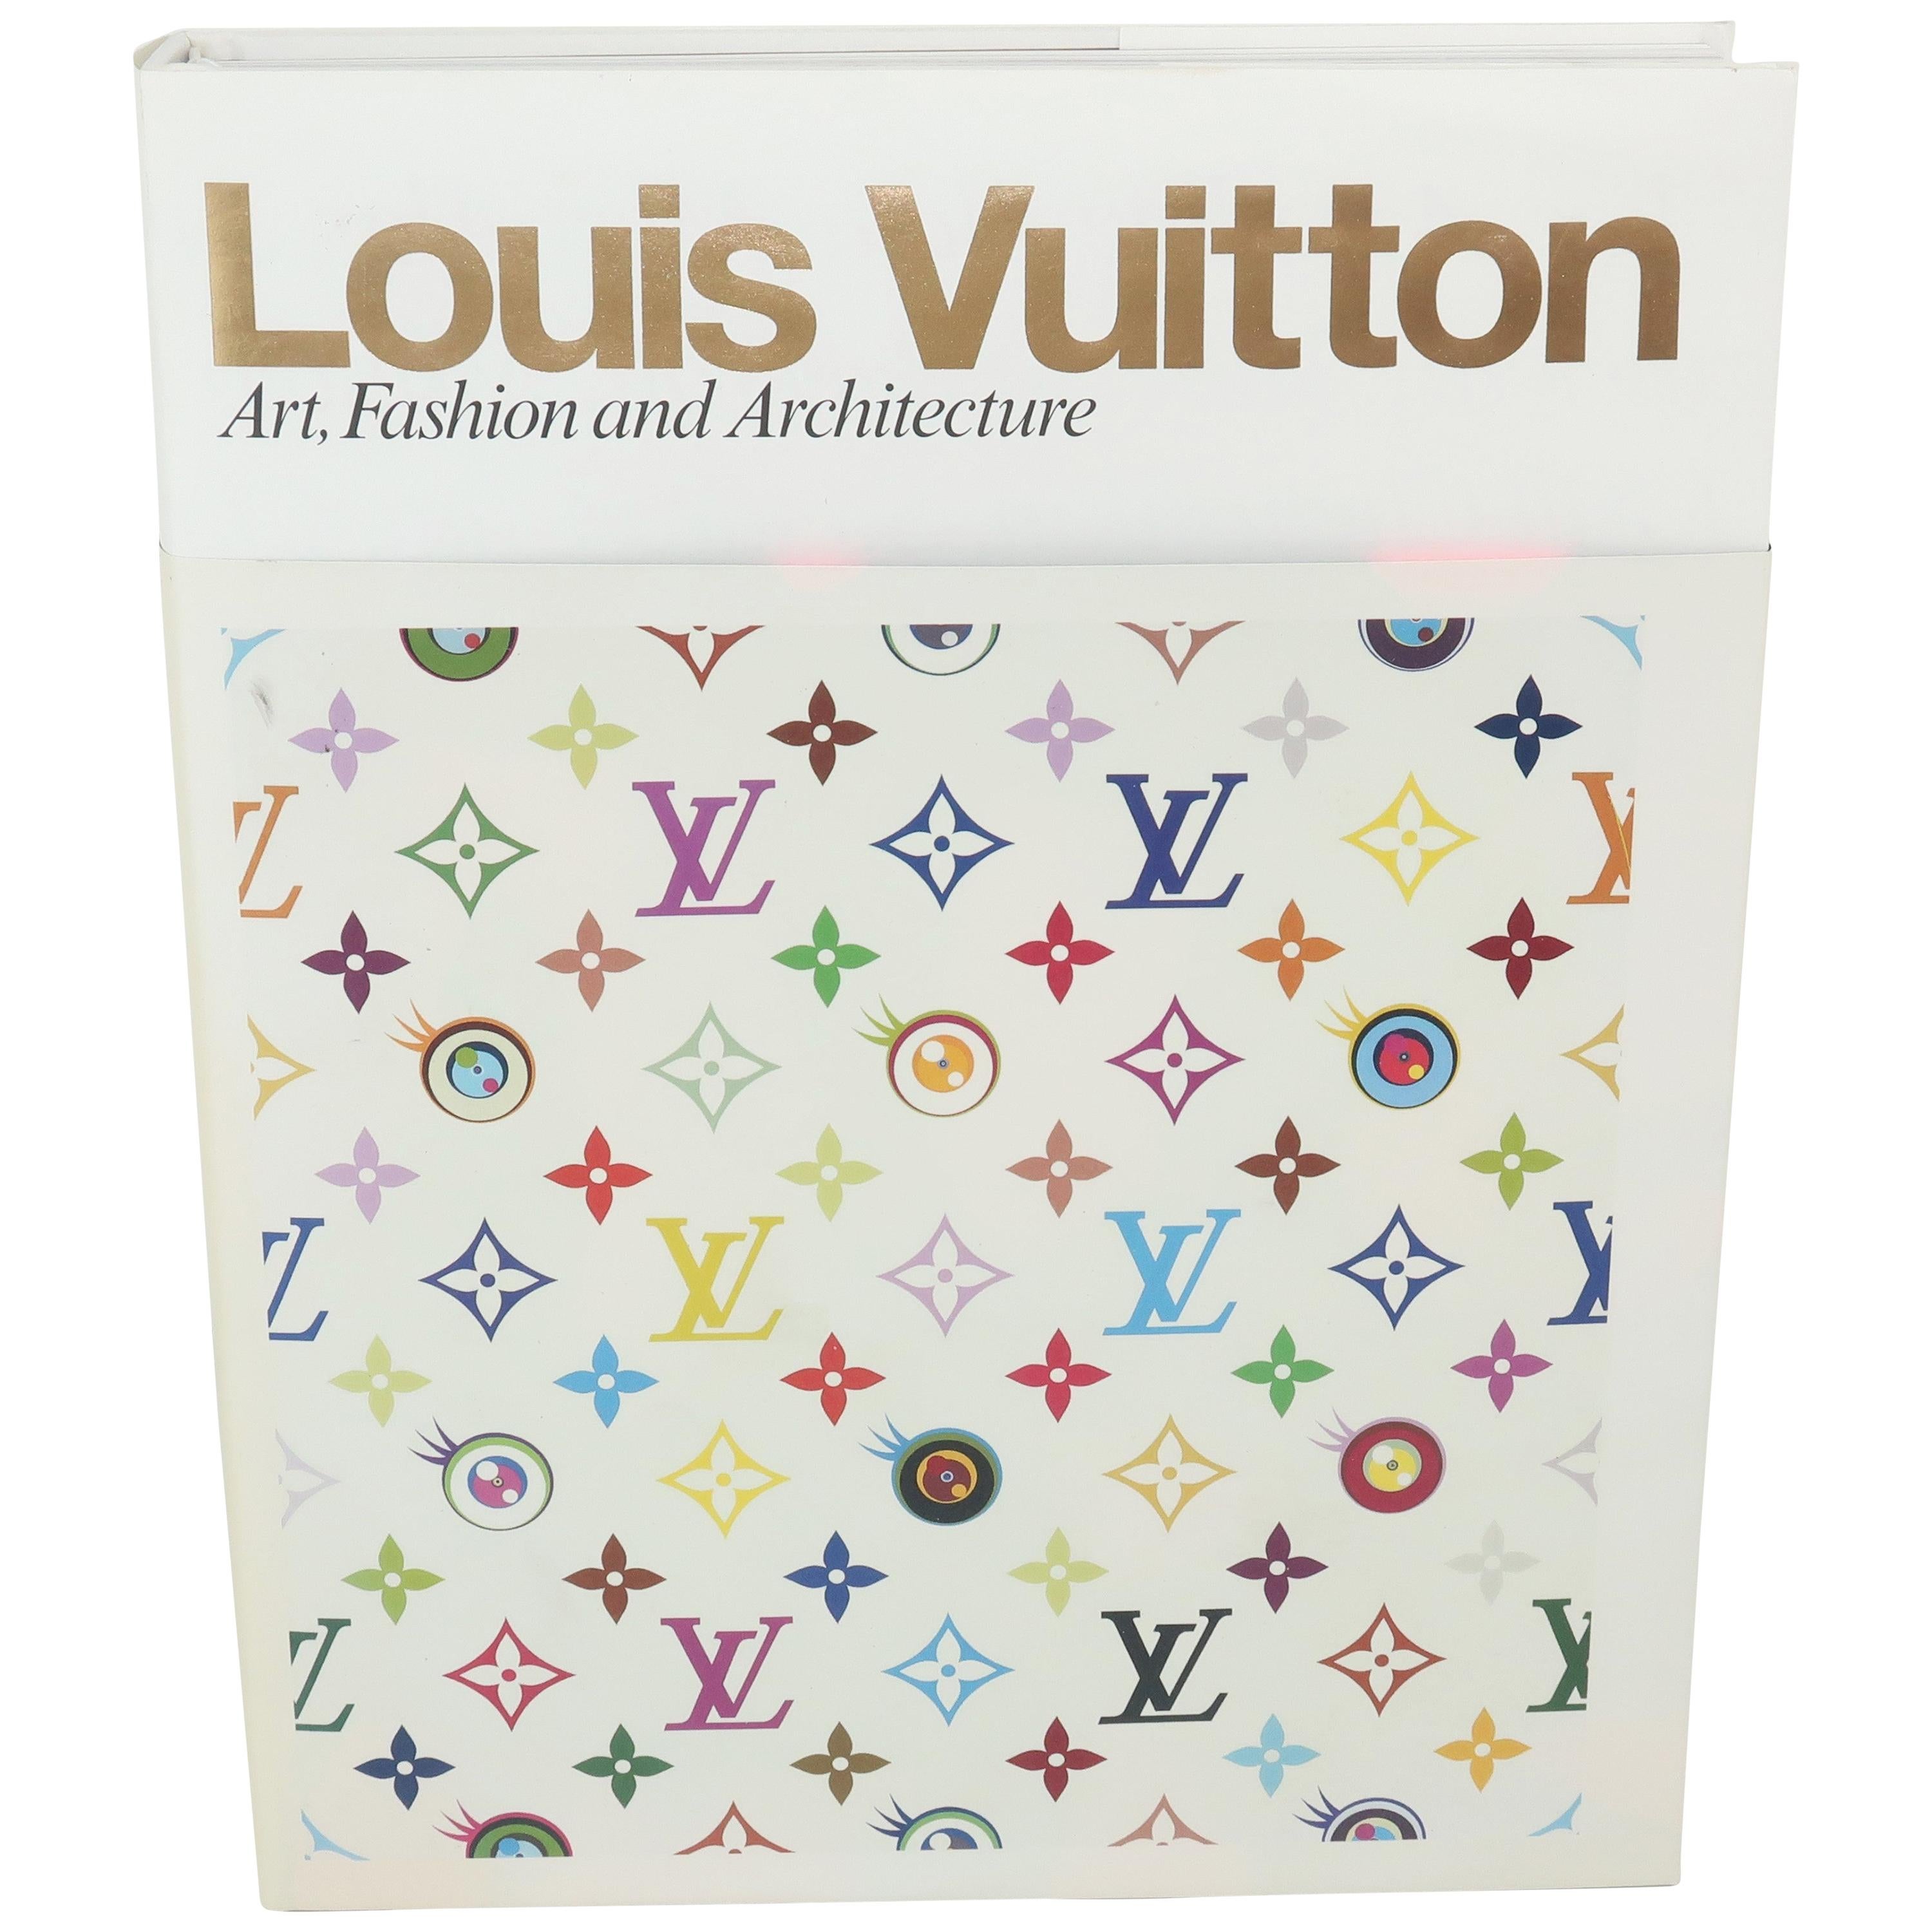 Louis Vuitton Art, Fashion and Architecture Deluxe Limited Edition